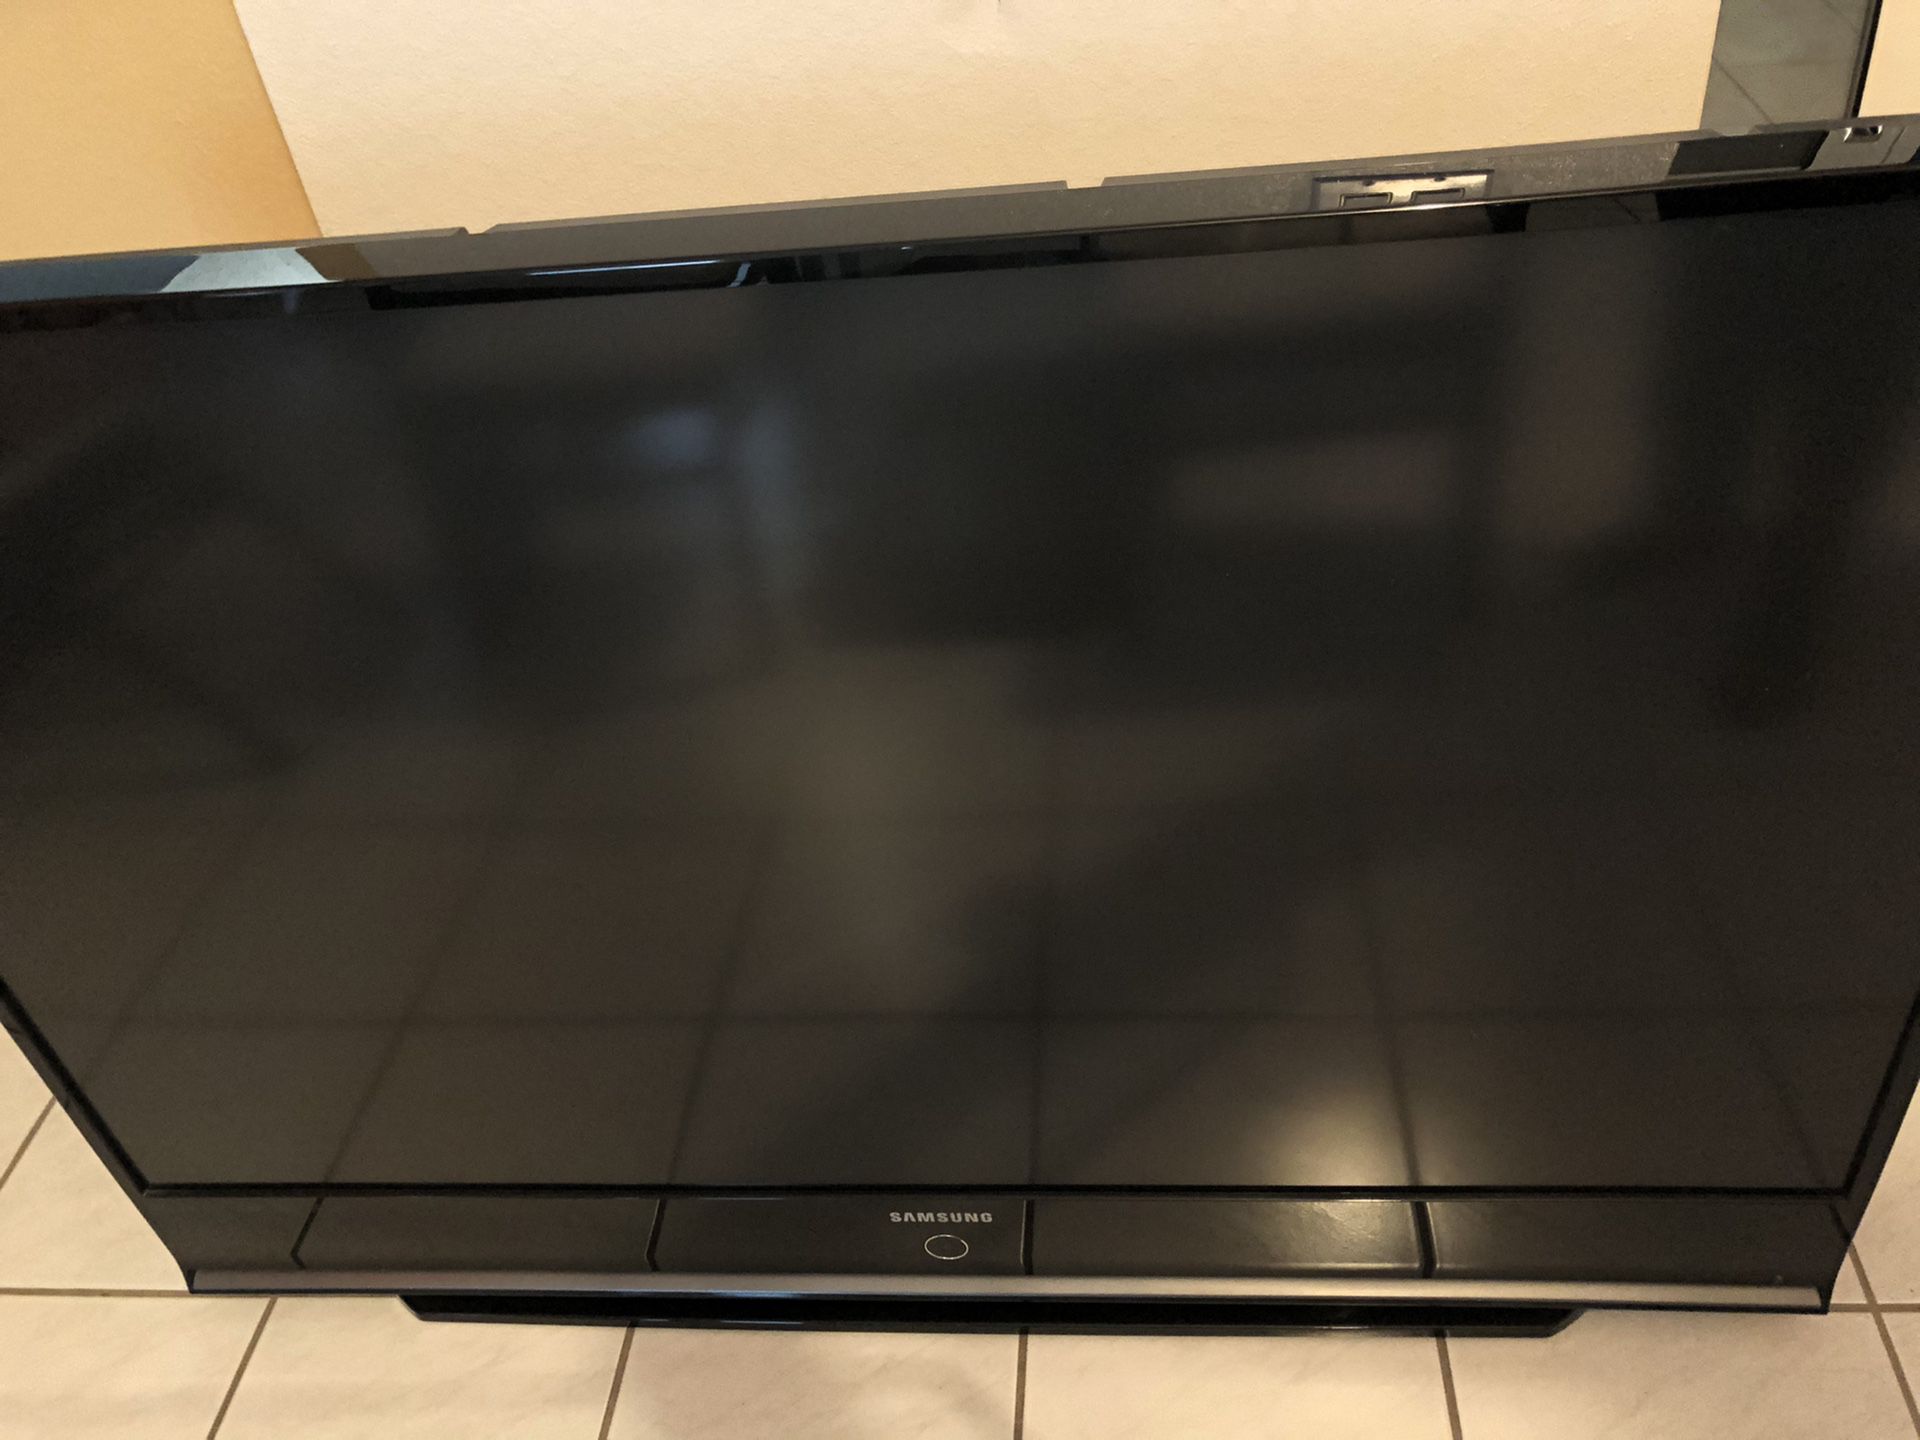 Samsung TV - 55” Inches